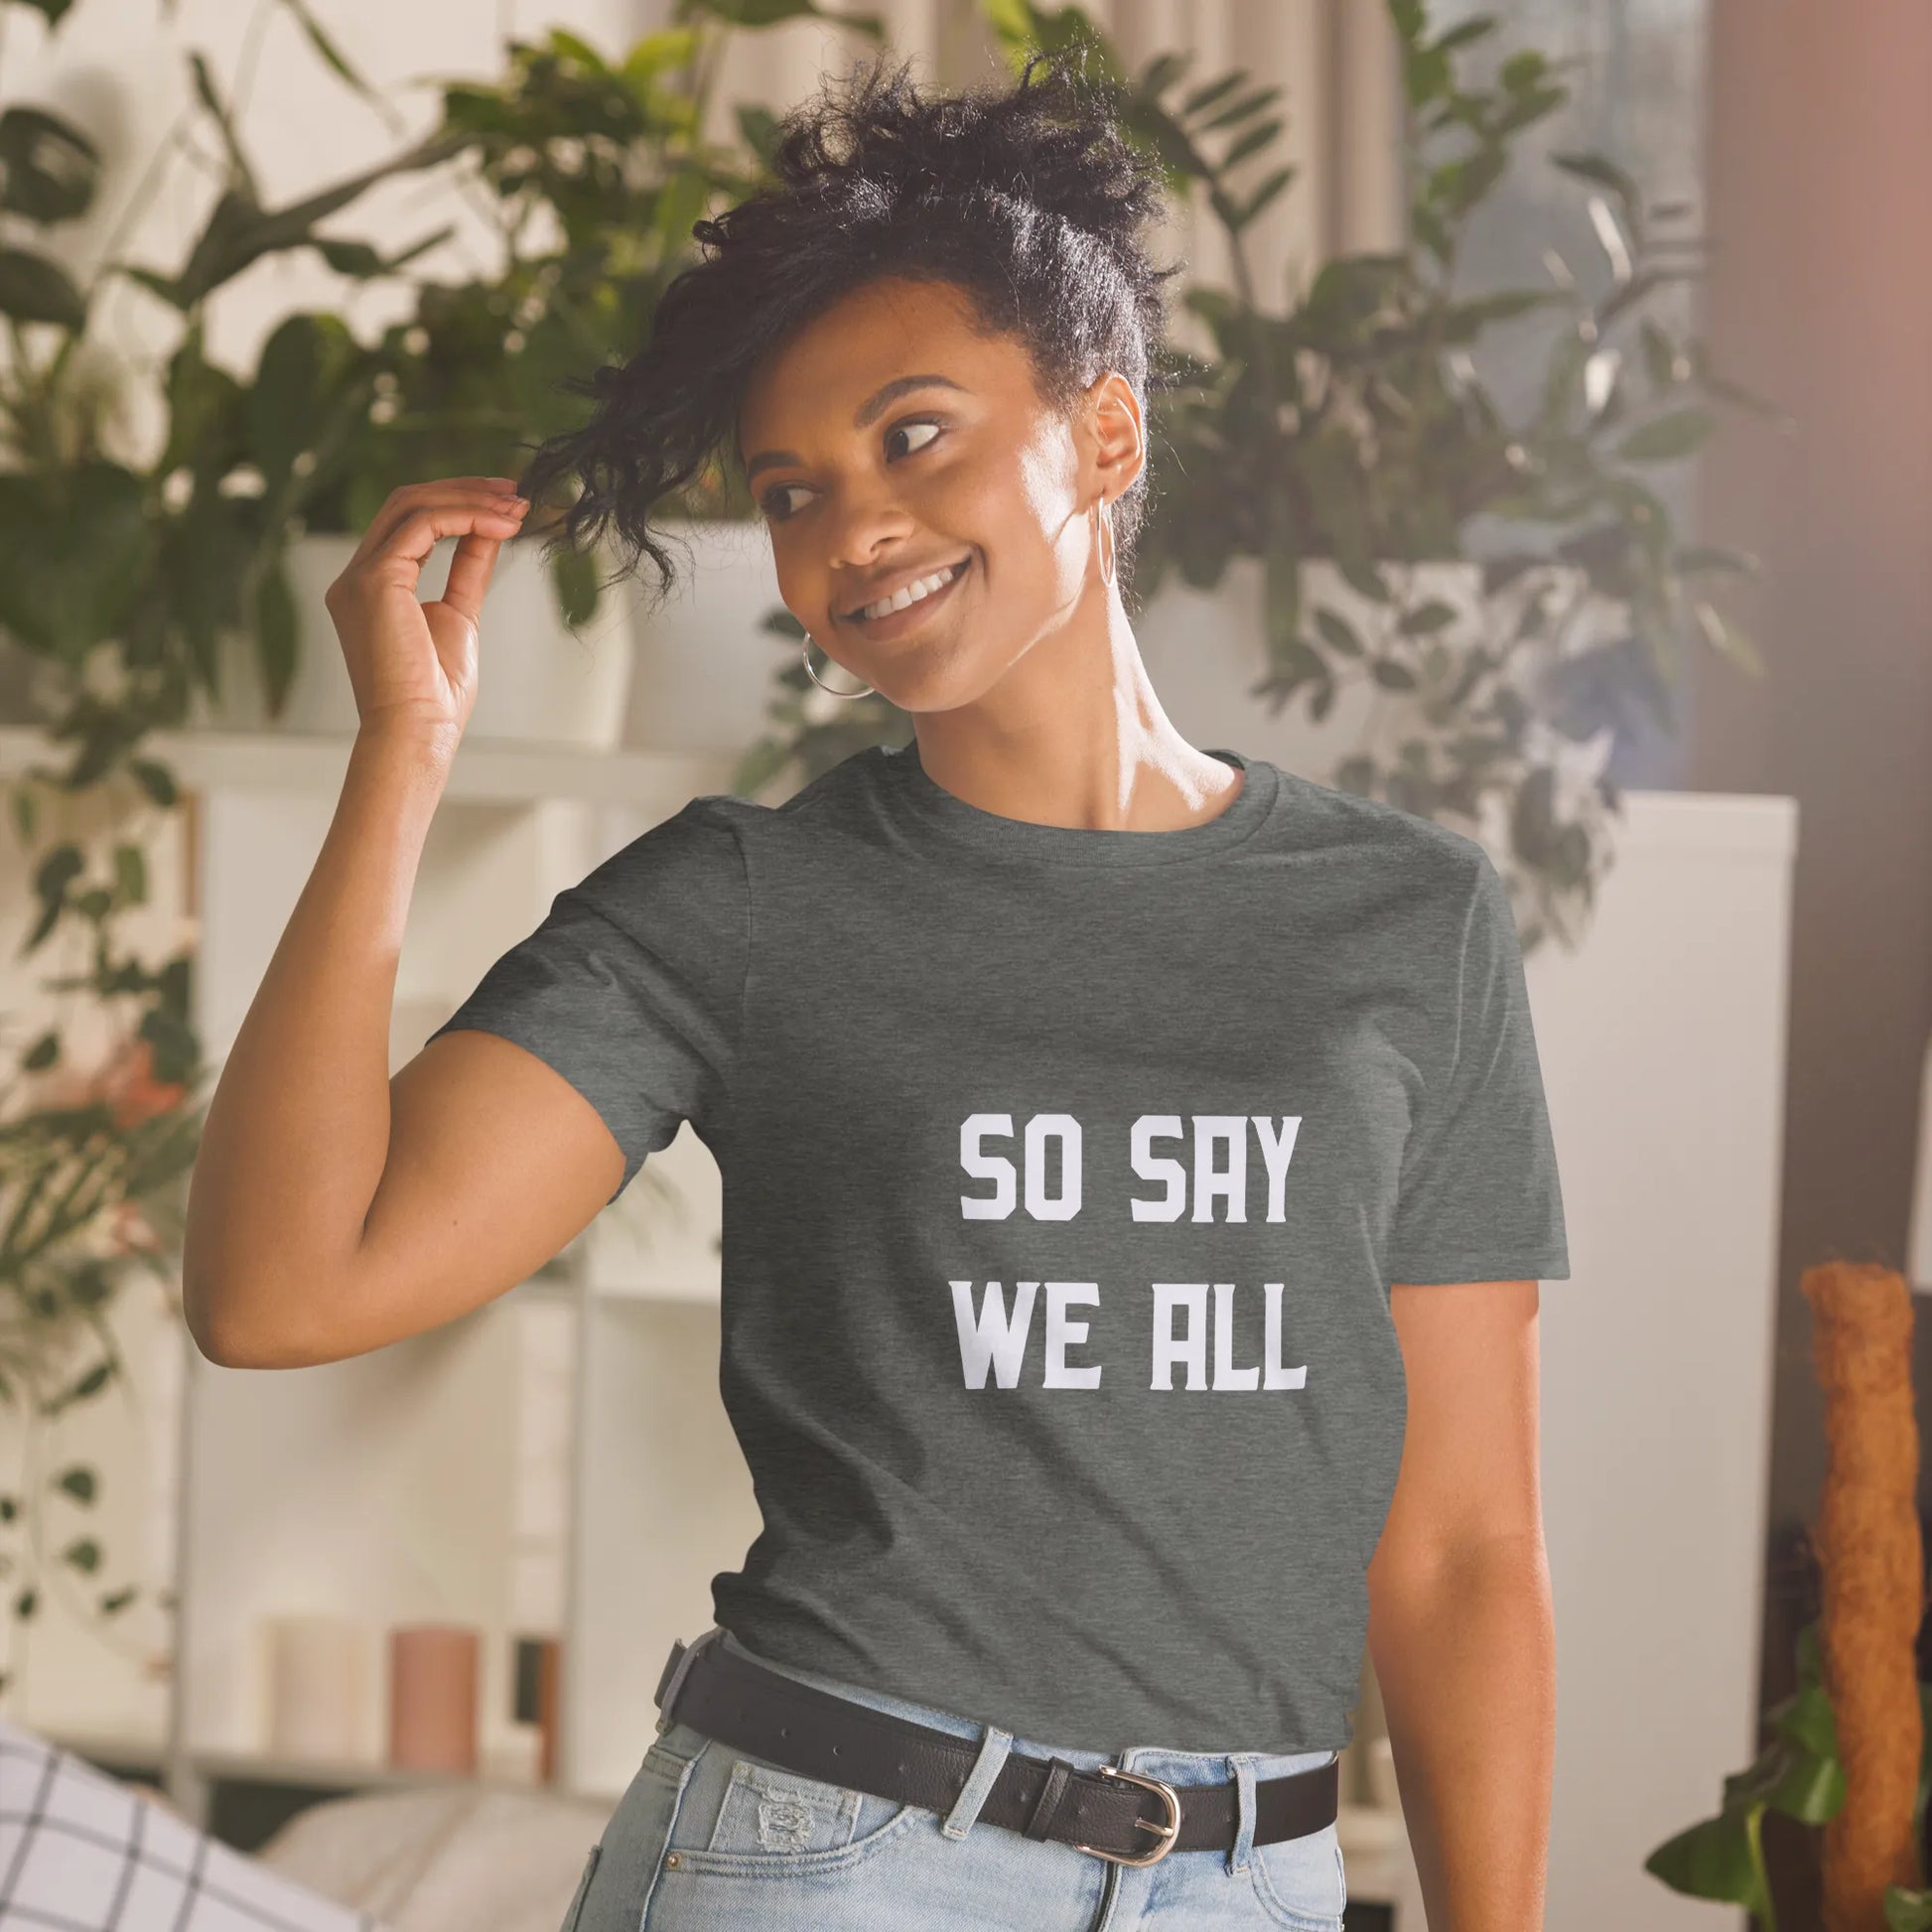 So Say We All Tee in Dark Heather Grey on woman front